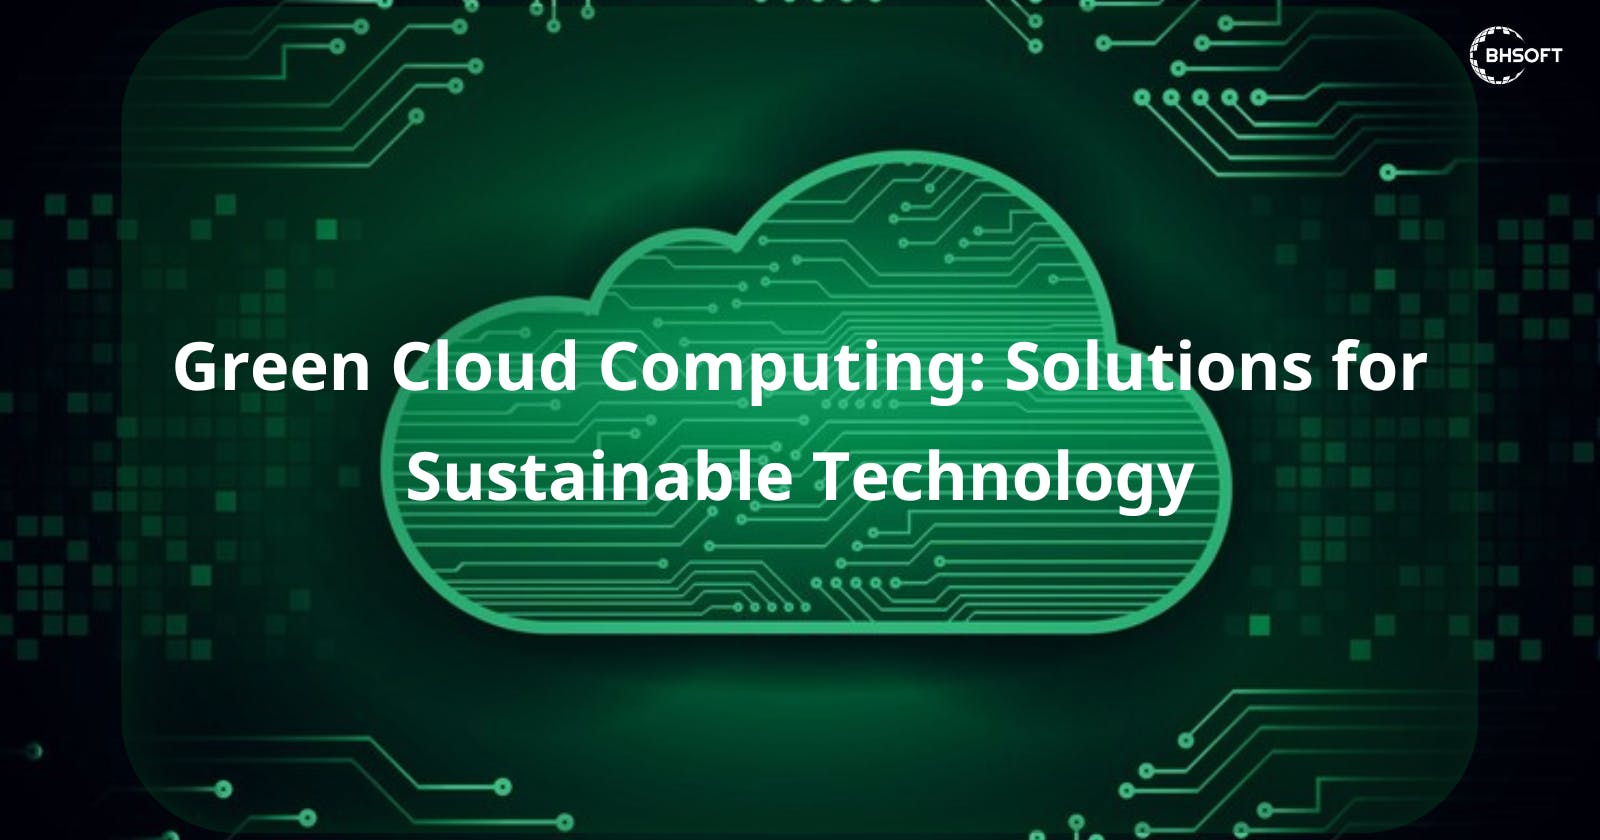 Green Cloud Computing: Solutions for Sustainable Technology